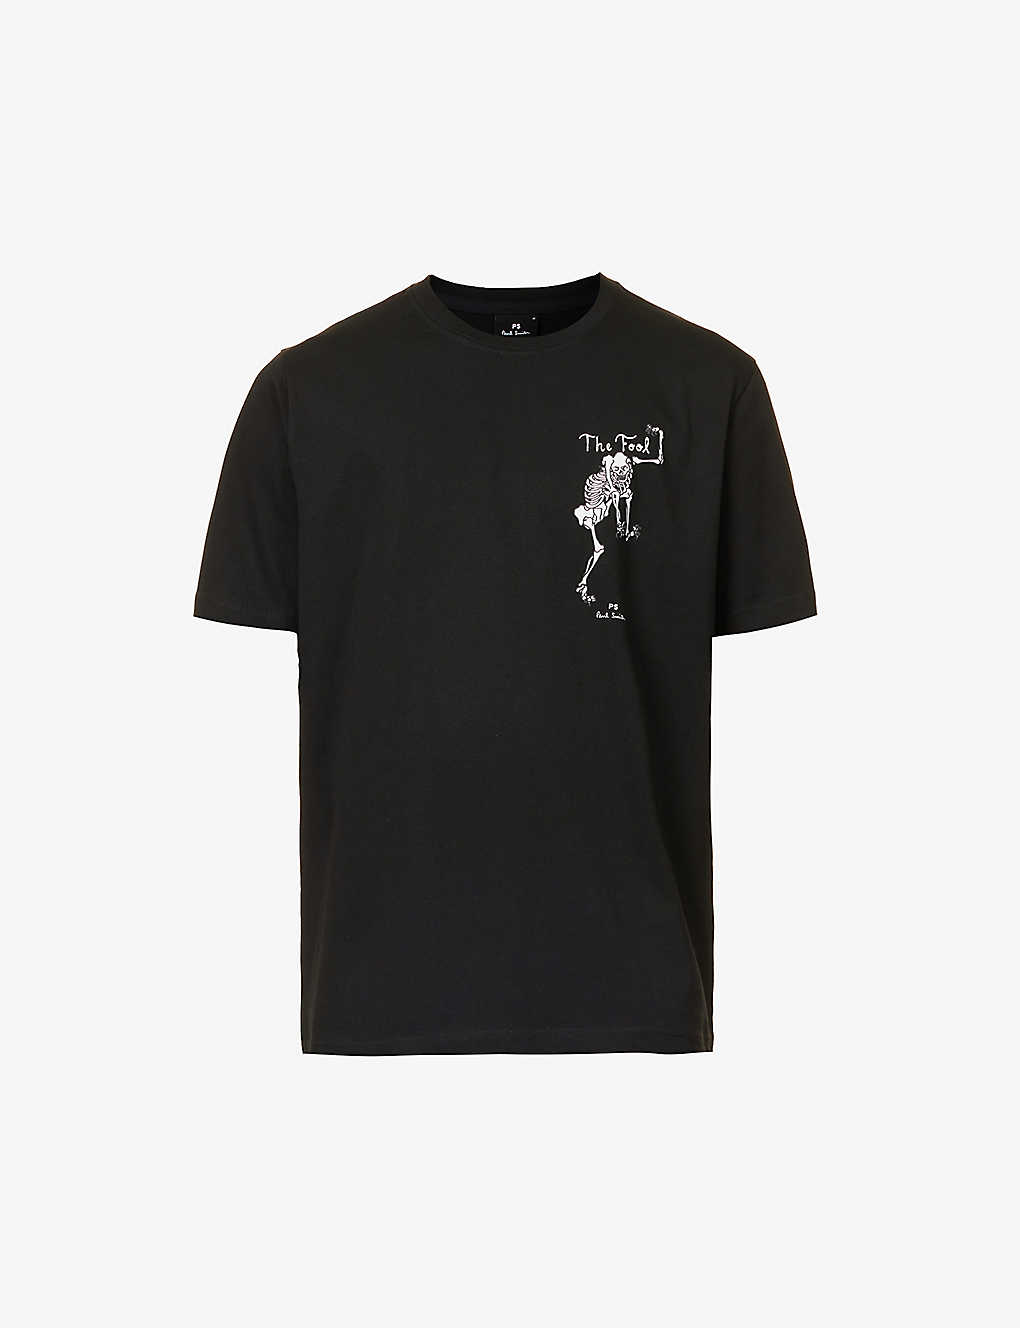 Shop Ps By Paul Smith Men's Black The Fool Graphic-print Cotton-jersey T-shirt